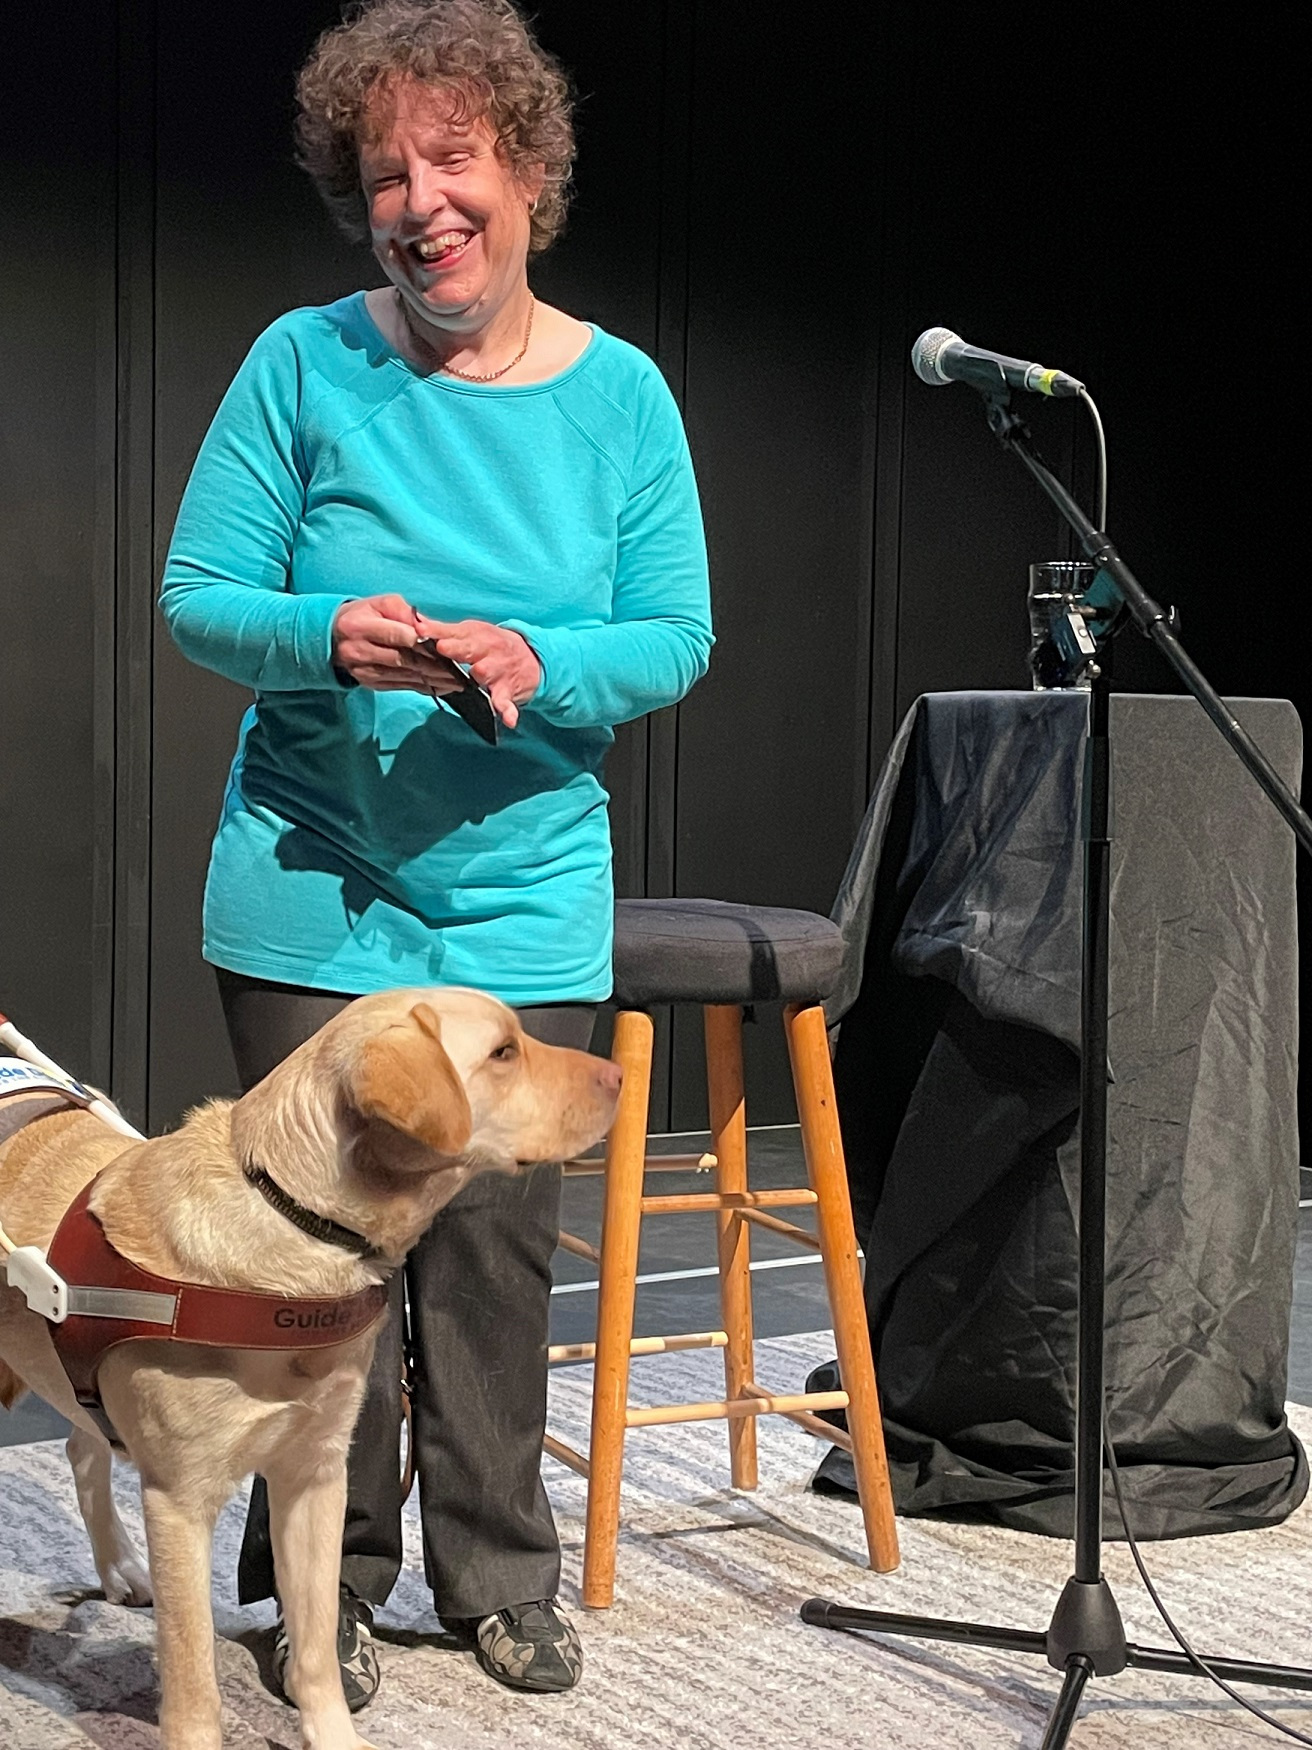 Kim stands on stage smiling with her yellow lab guide dog.